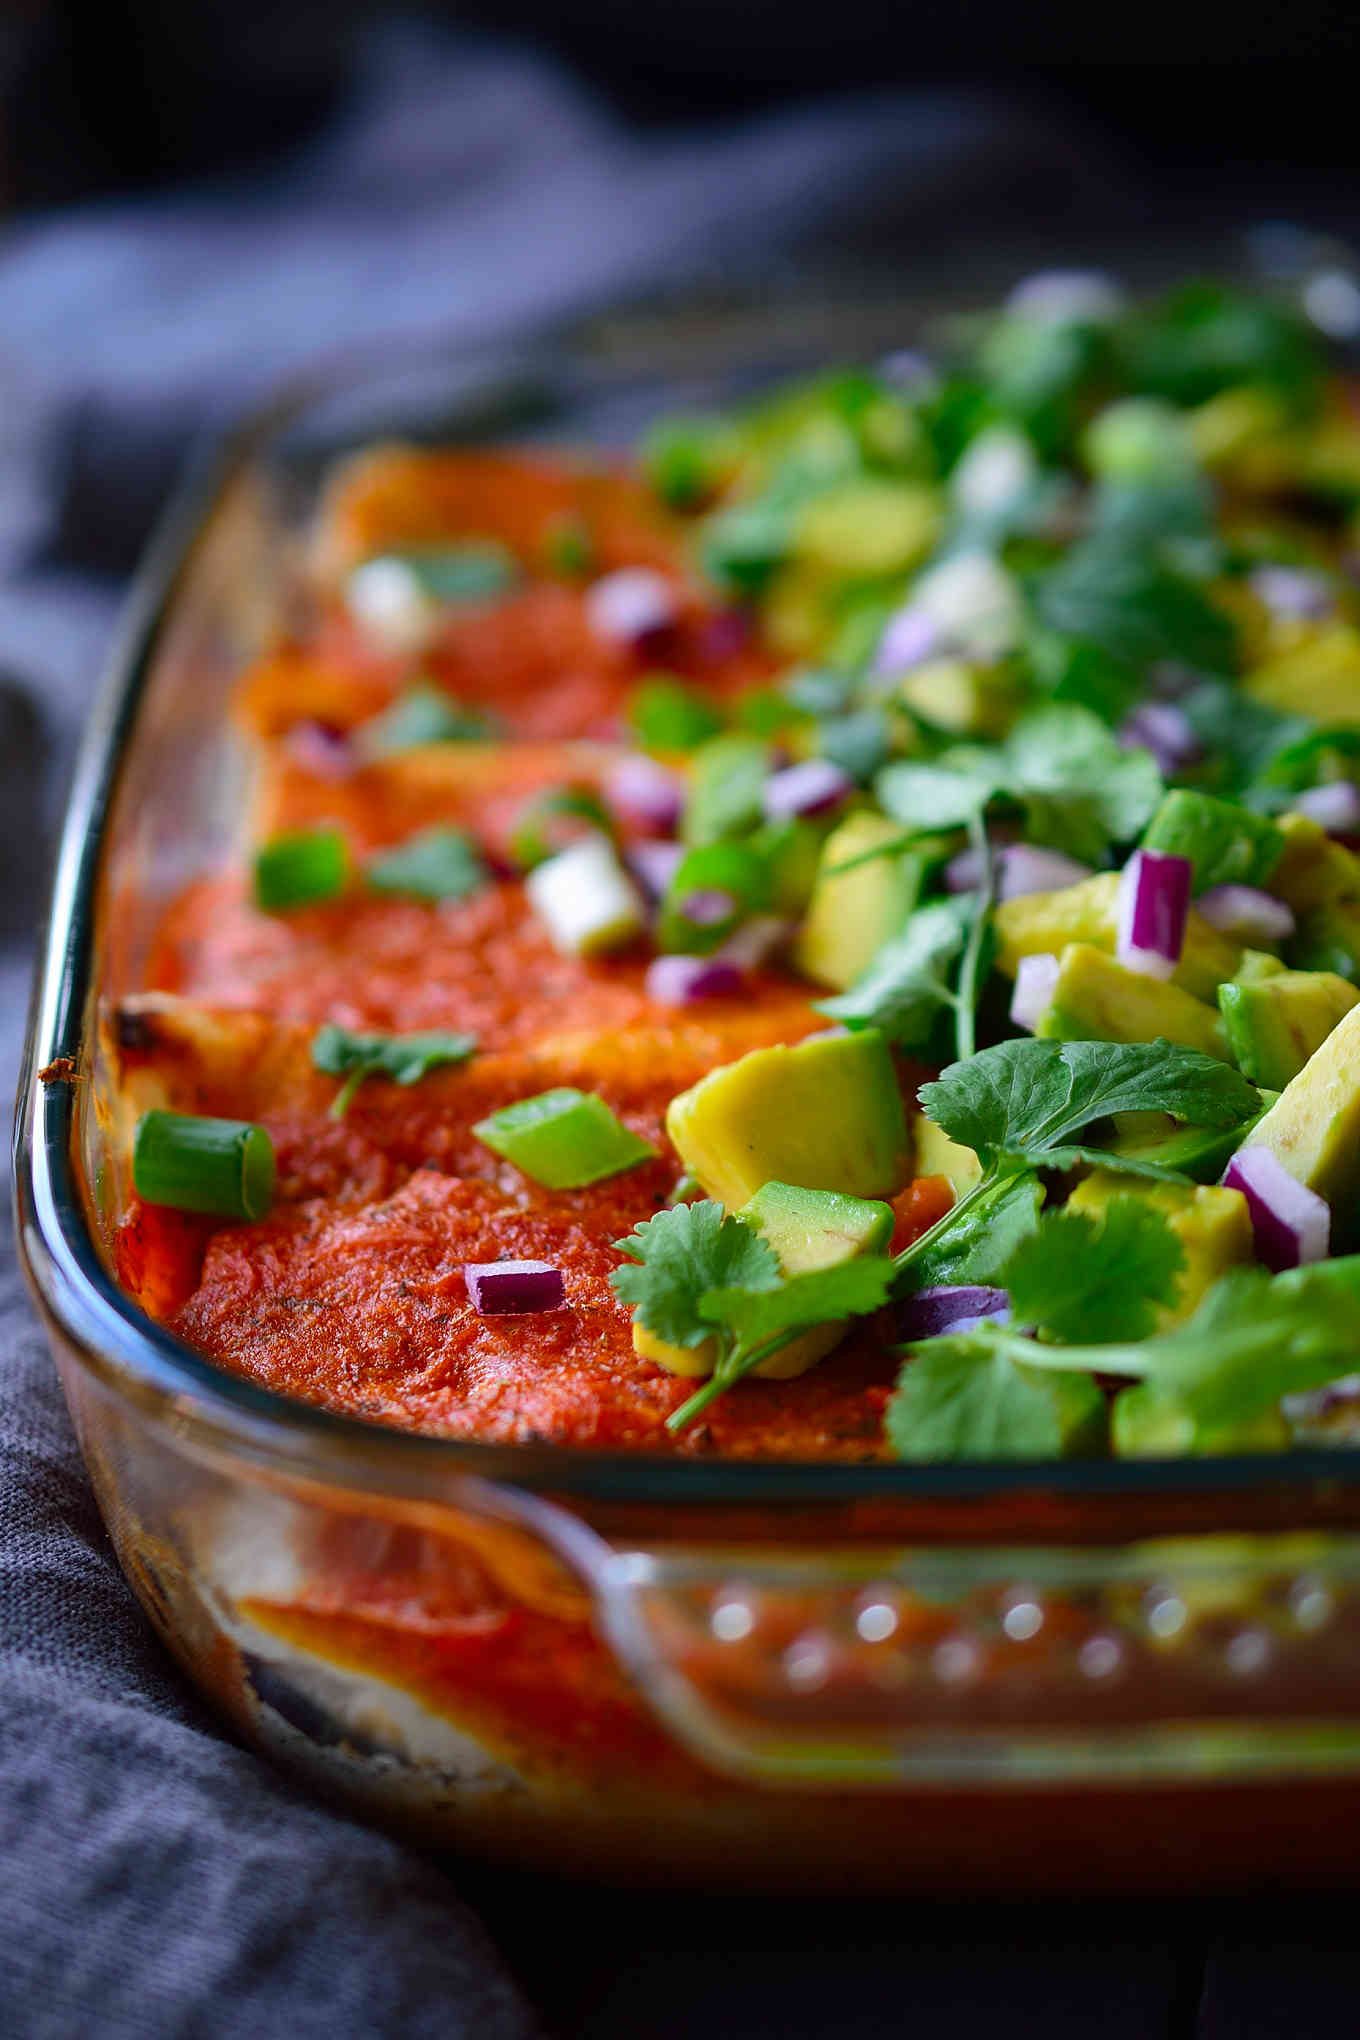 This recipe for pinto bean enchiladas is super hearty with a filling of slow-cooked smoky and spicy pinto beans and spinach, a quick and easy homemade enchilada sauce and topped with creamy avocado, sweet red onion and fresh cilantro. And in case you didn’t notice, these enchiladas are totally vegan, too!